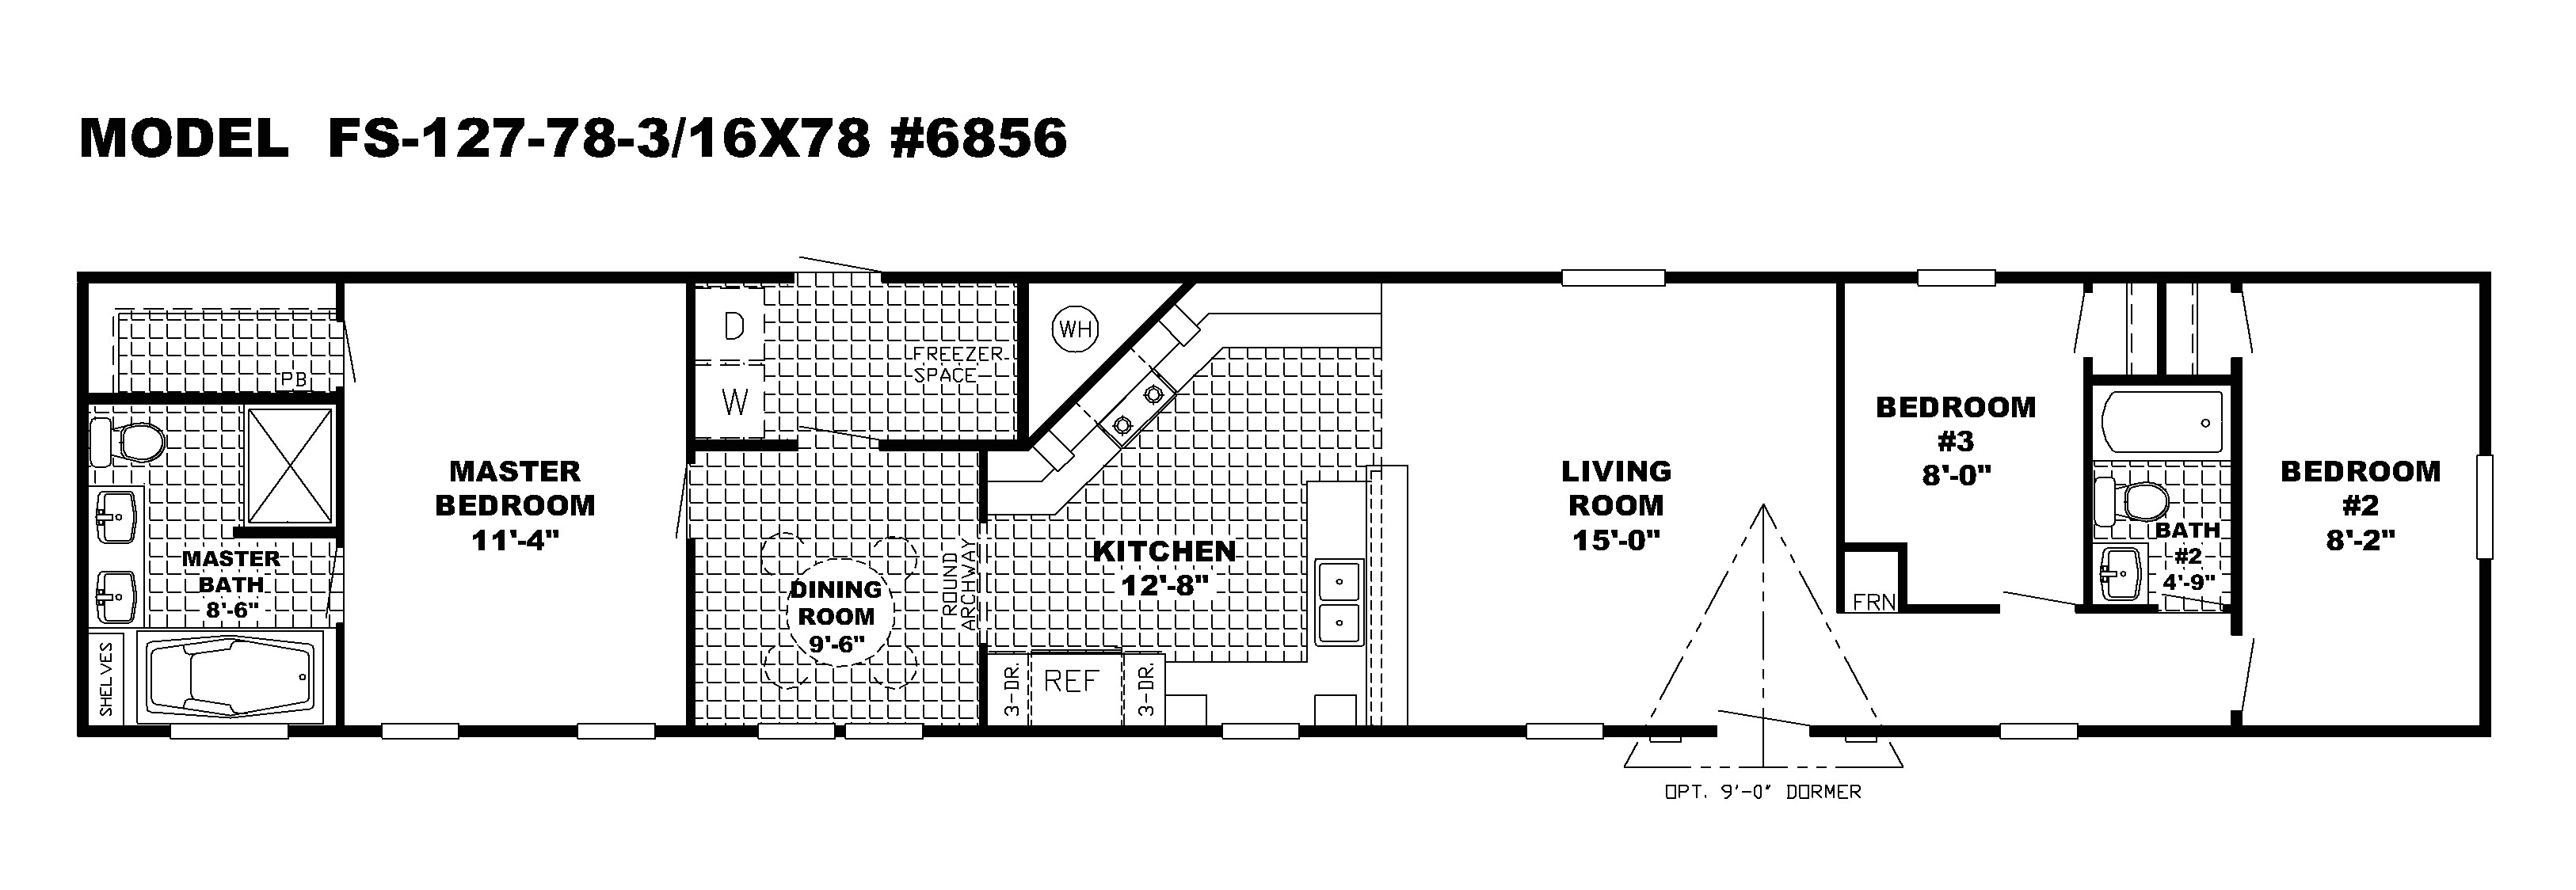 3 bedroom single wide mobile home floor plans collection and homes double images